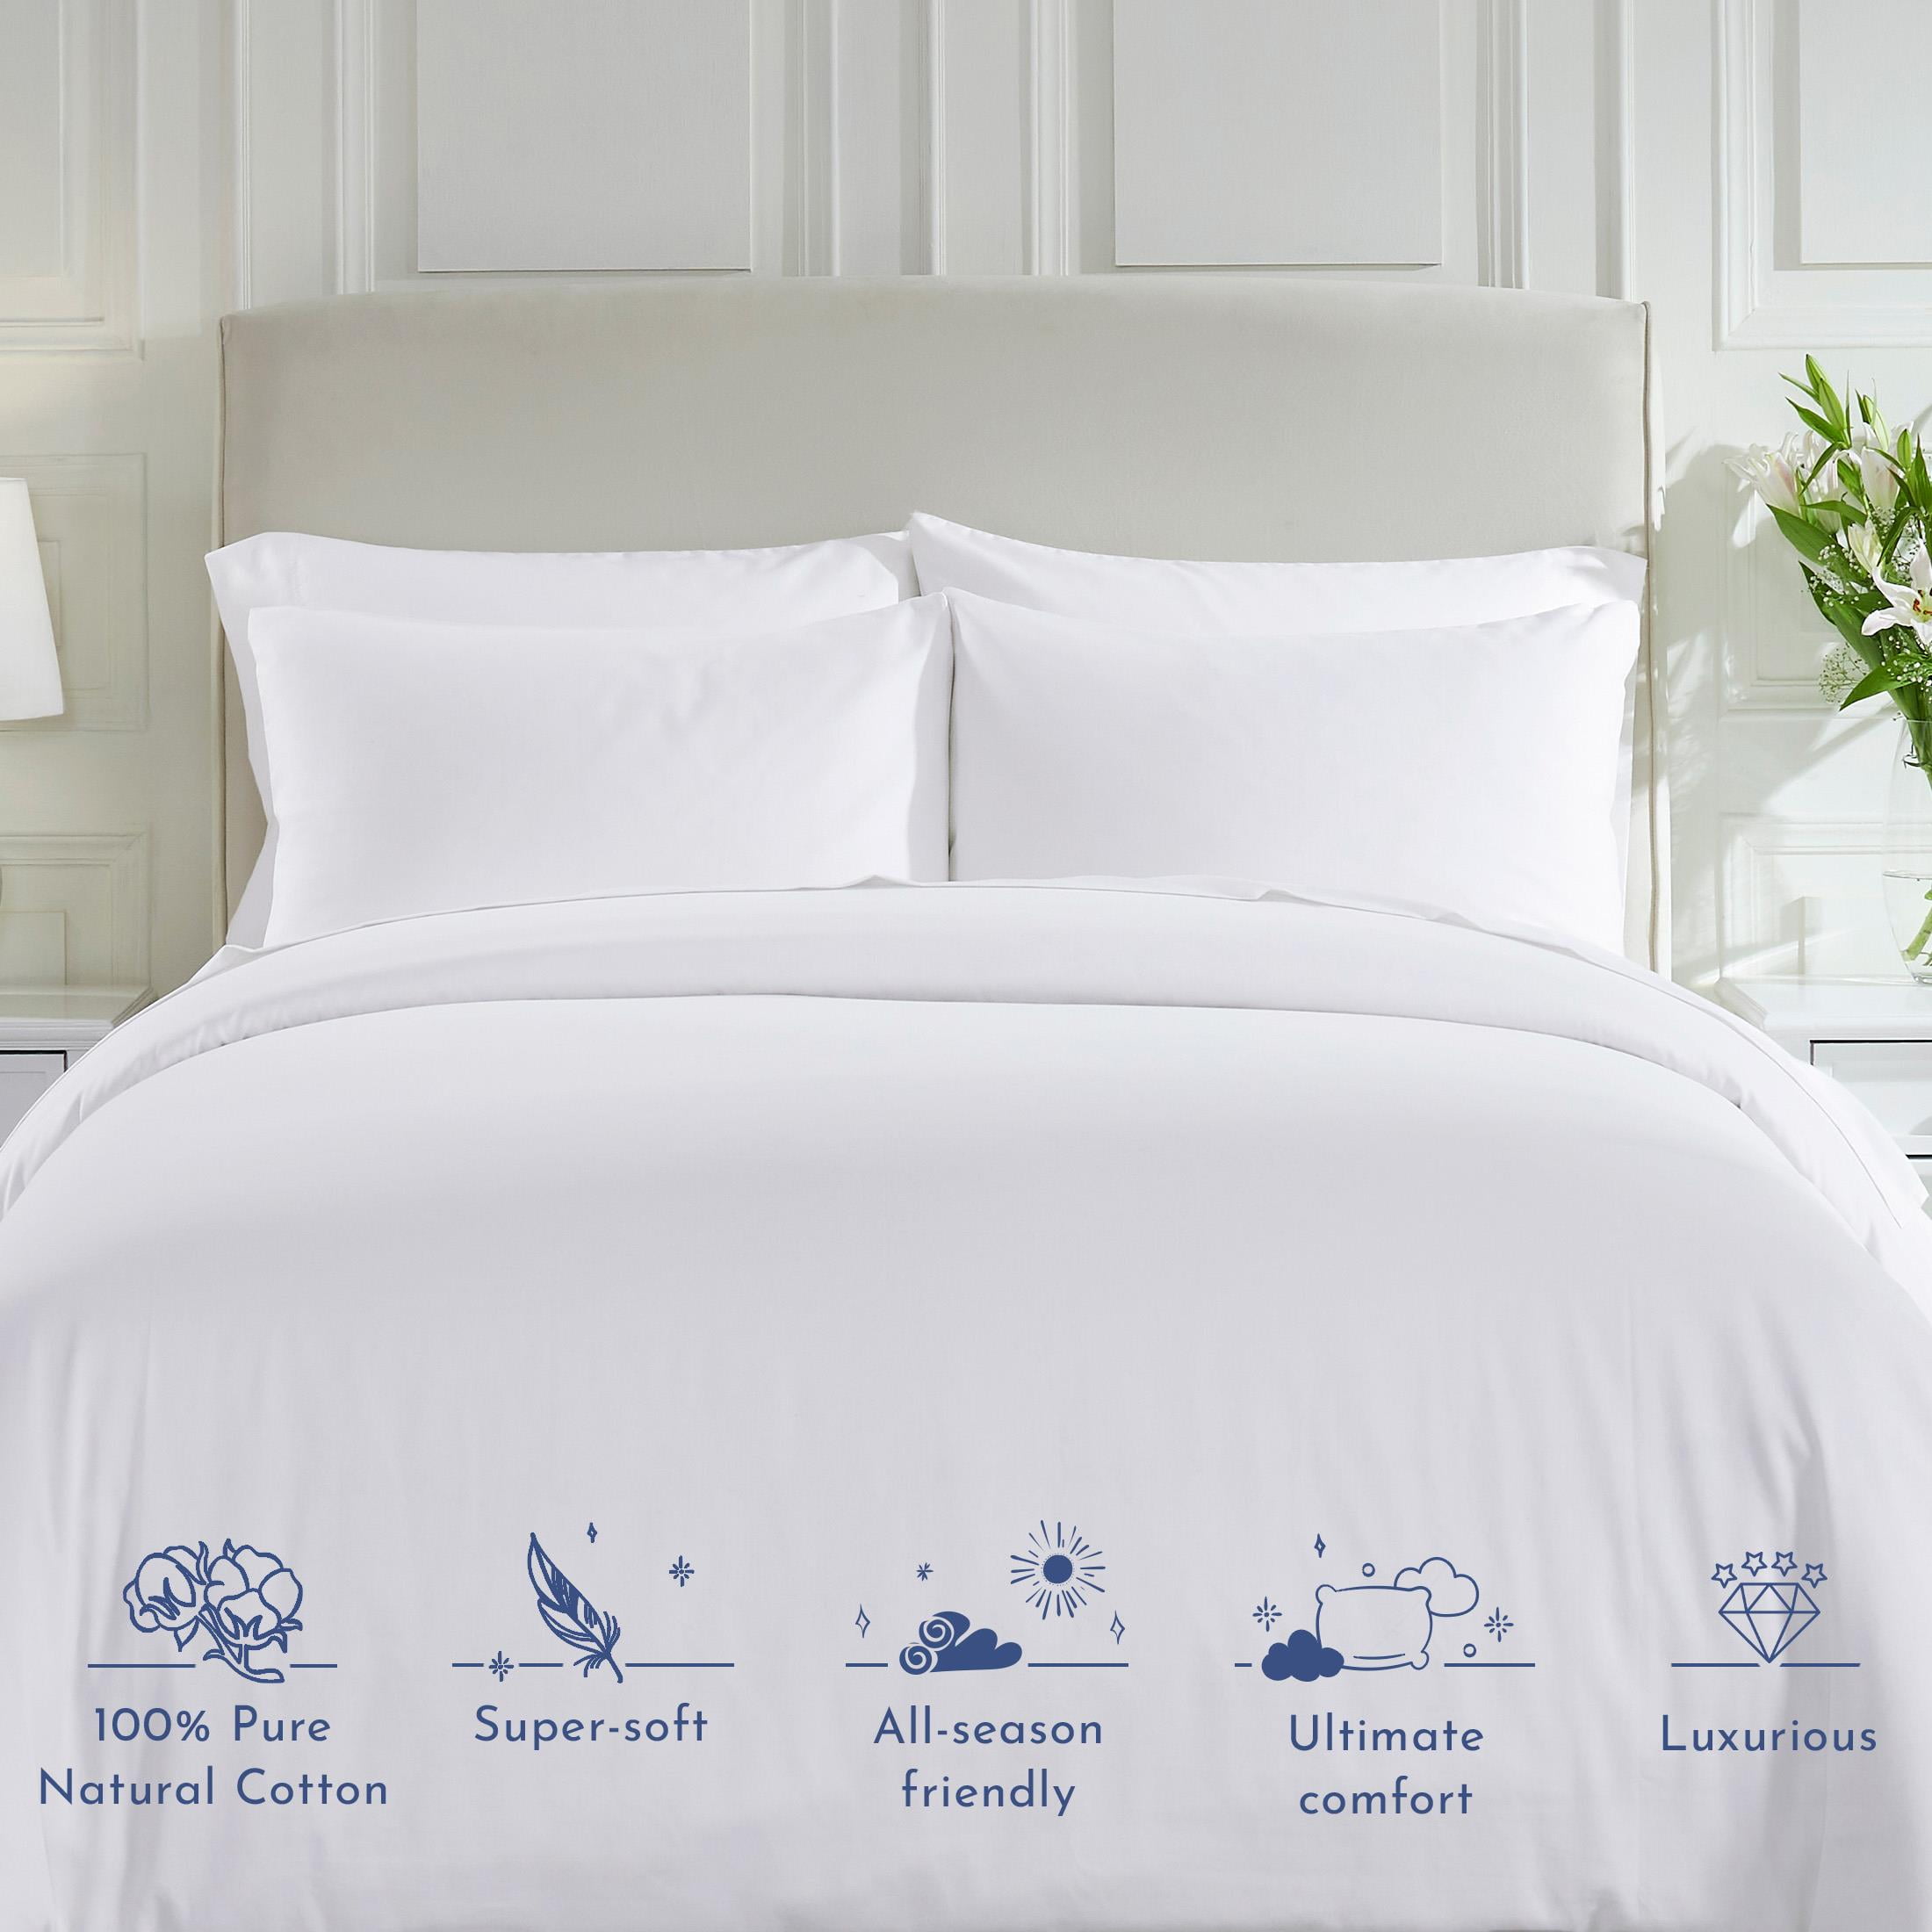 100% Natural Cotton Duvet Cover Premium 400 Thread Count, Hotel Quality Comforter  Cover, Silky Sateen Weave, Button Closure and Corner Ties (1 Piece, Bright  White, King)